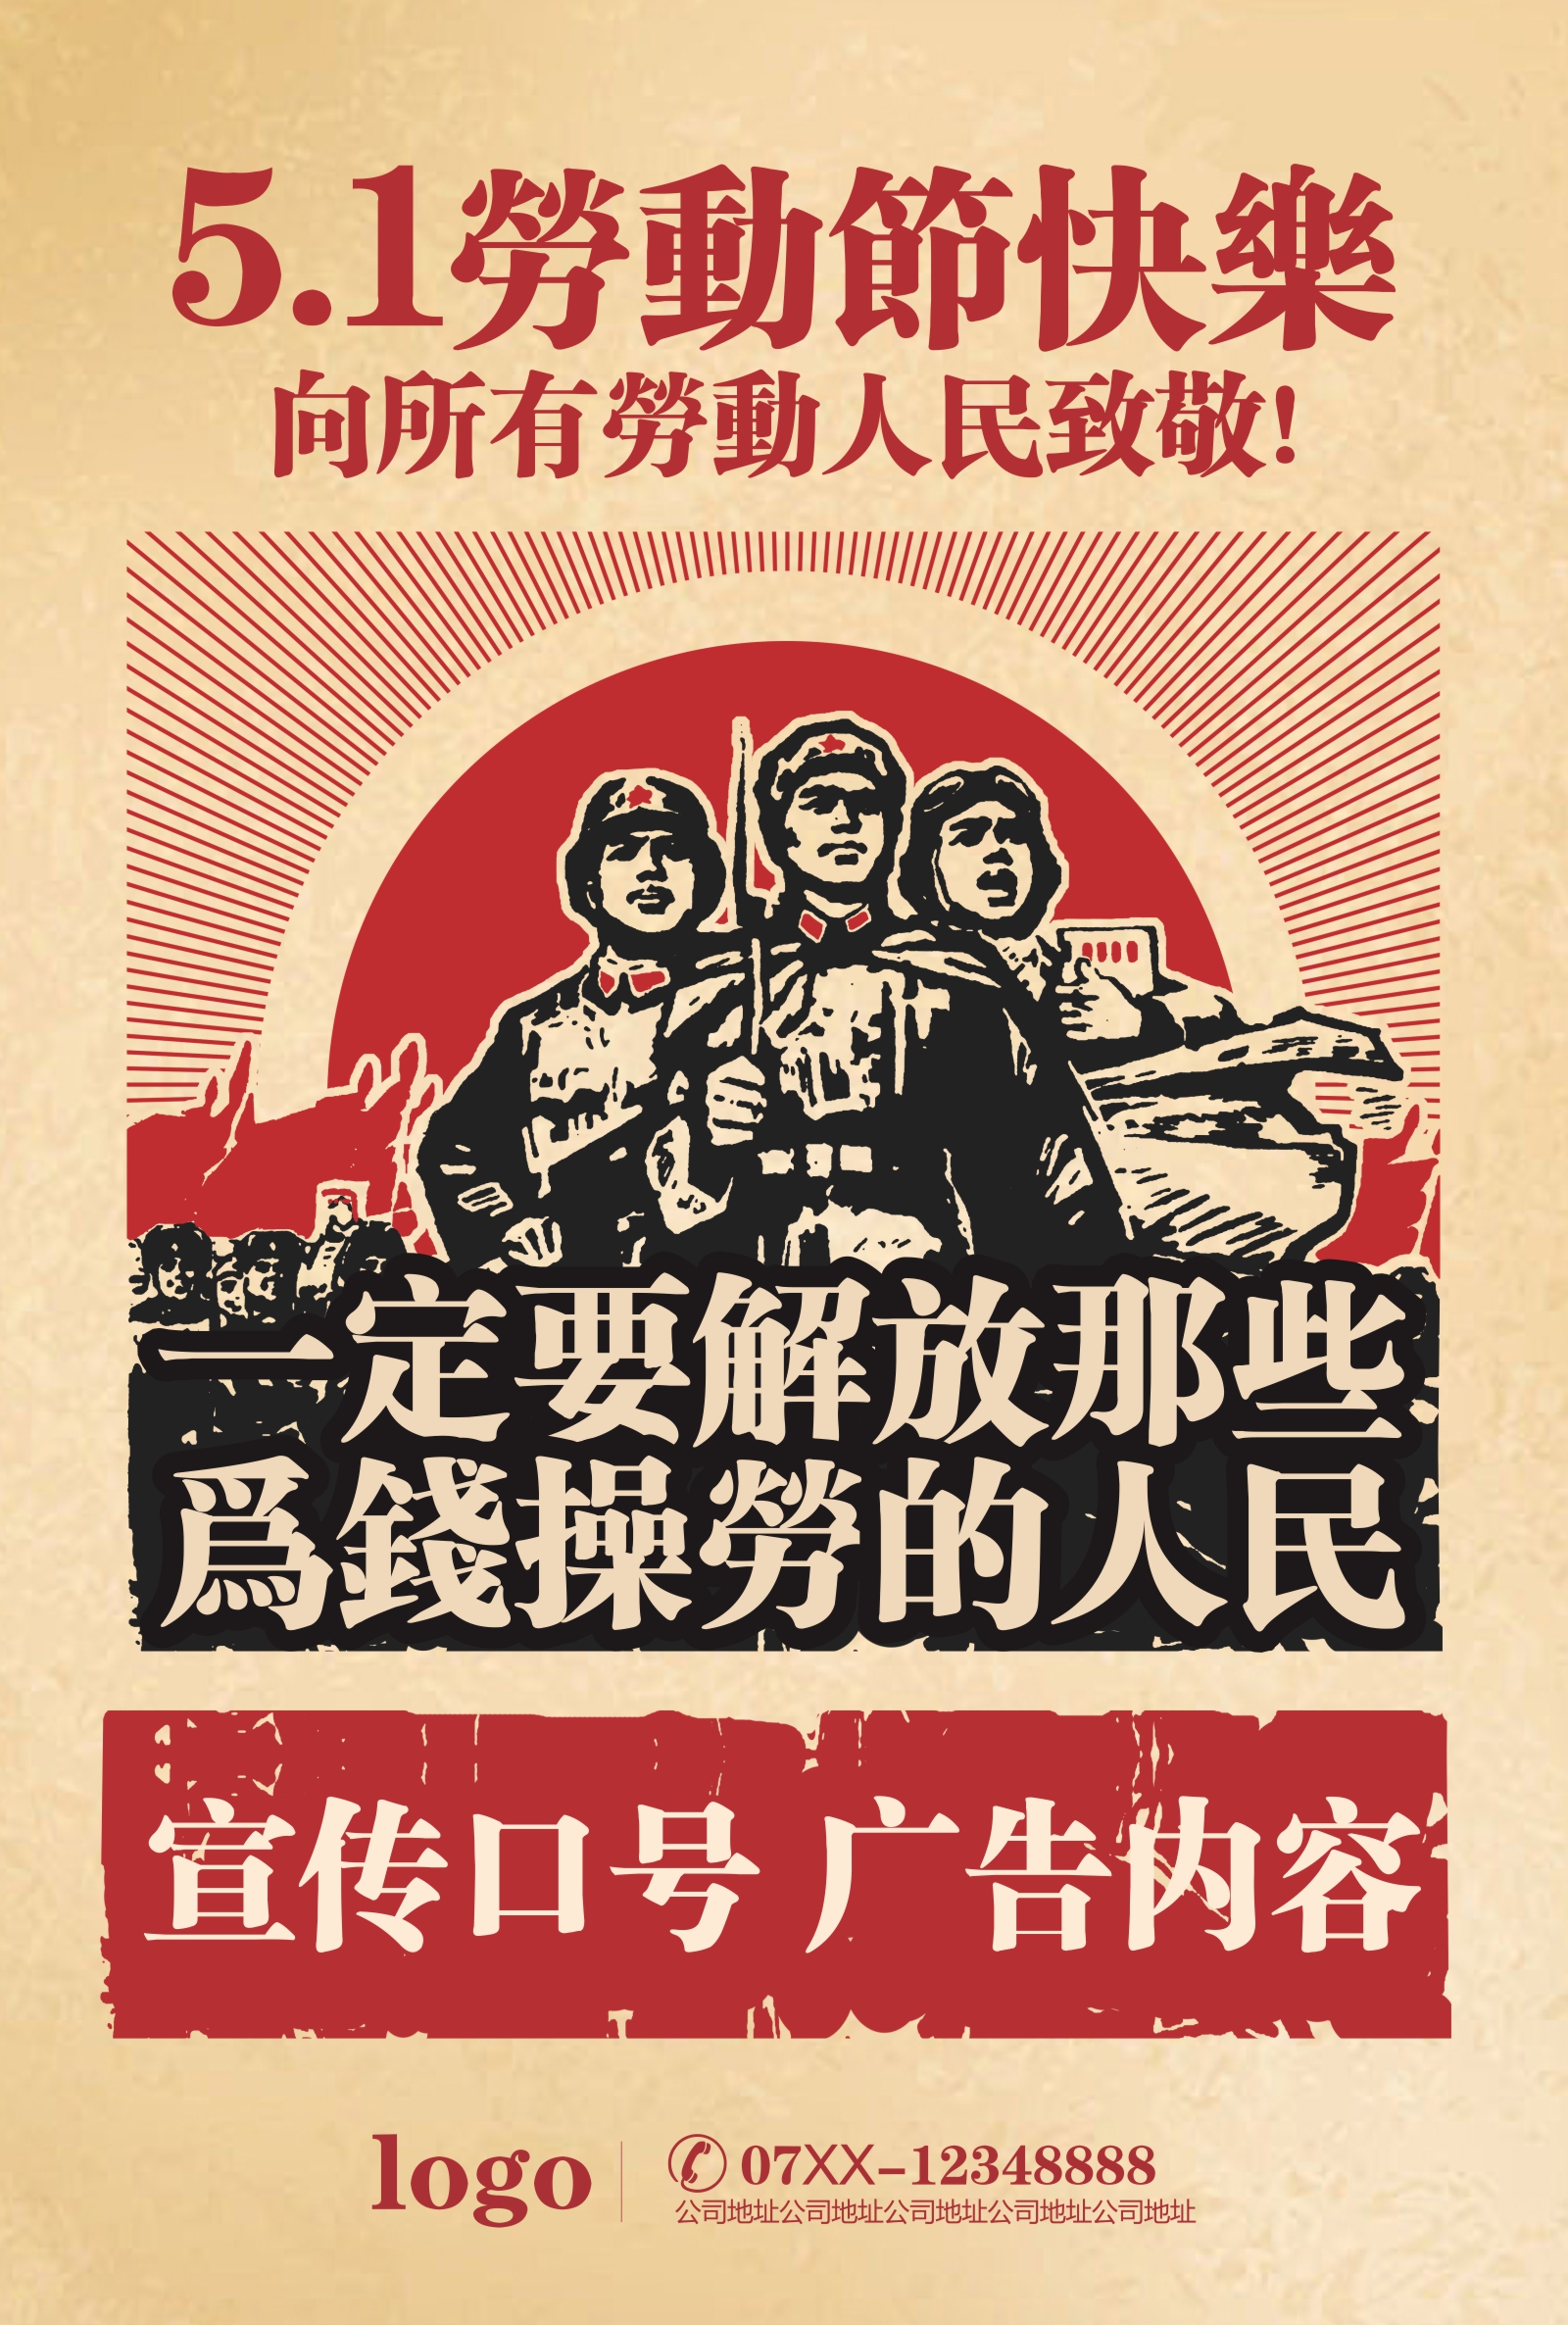 May Day Labor Day Happy Red Revolution Poster -  China Illustrations Vectors AI ESP